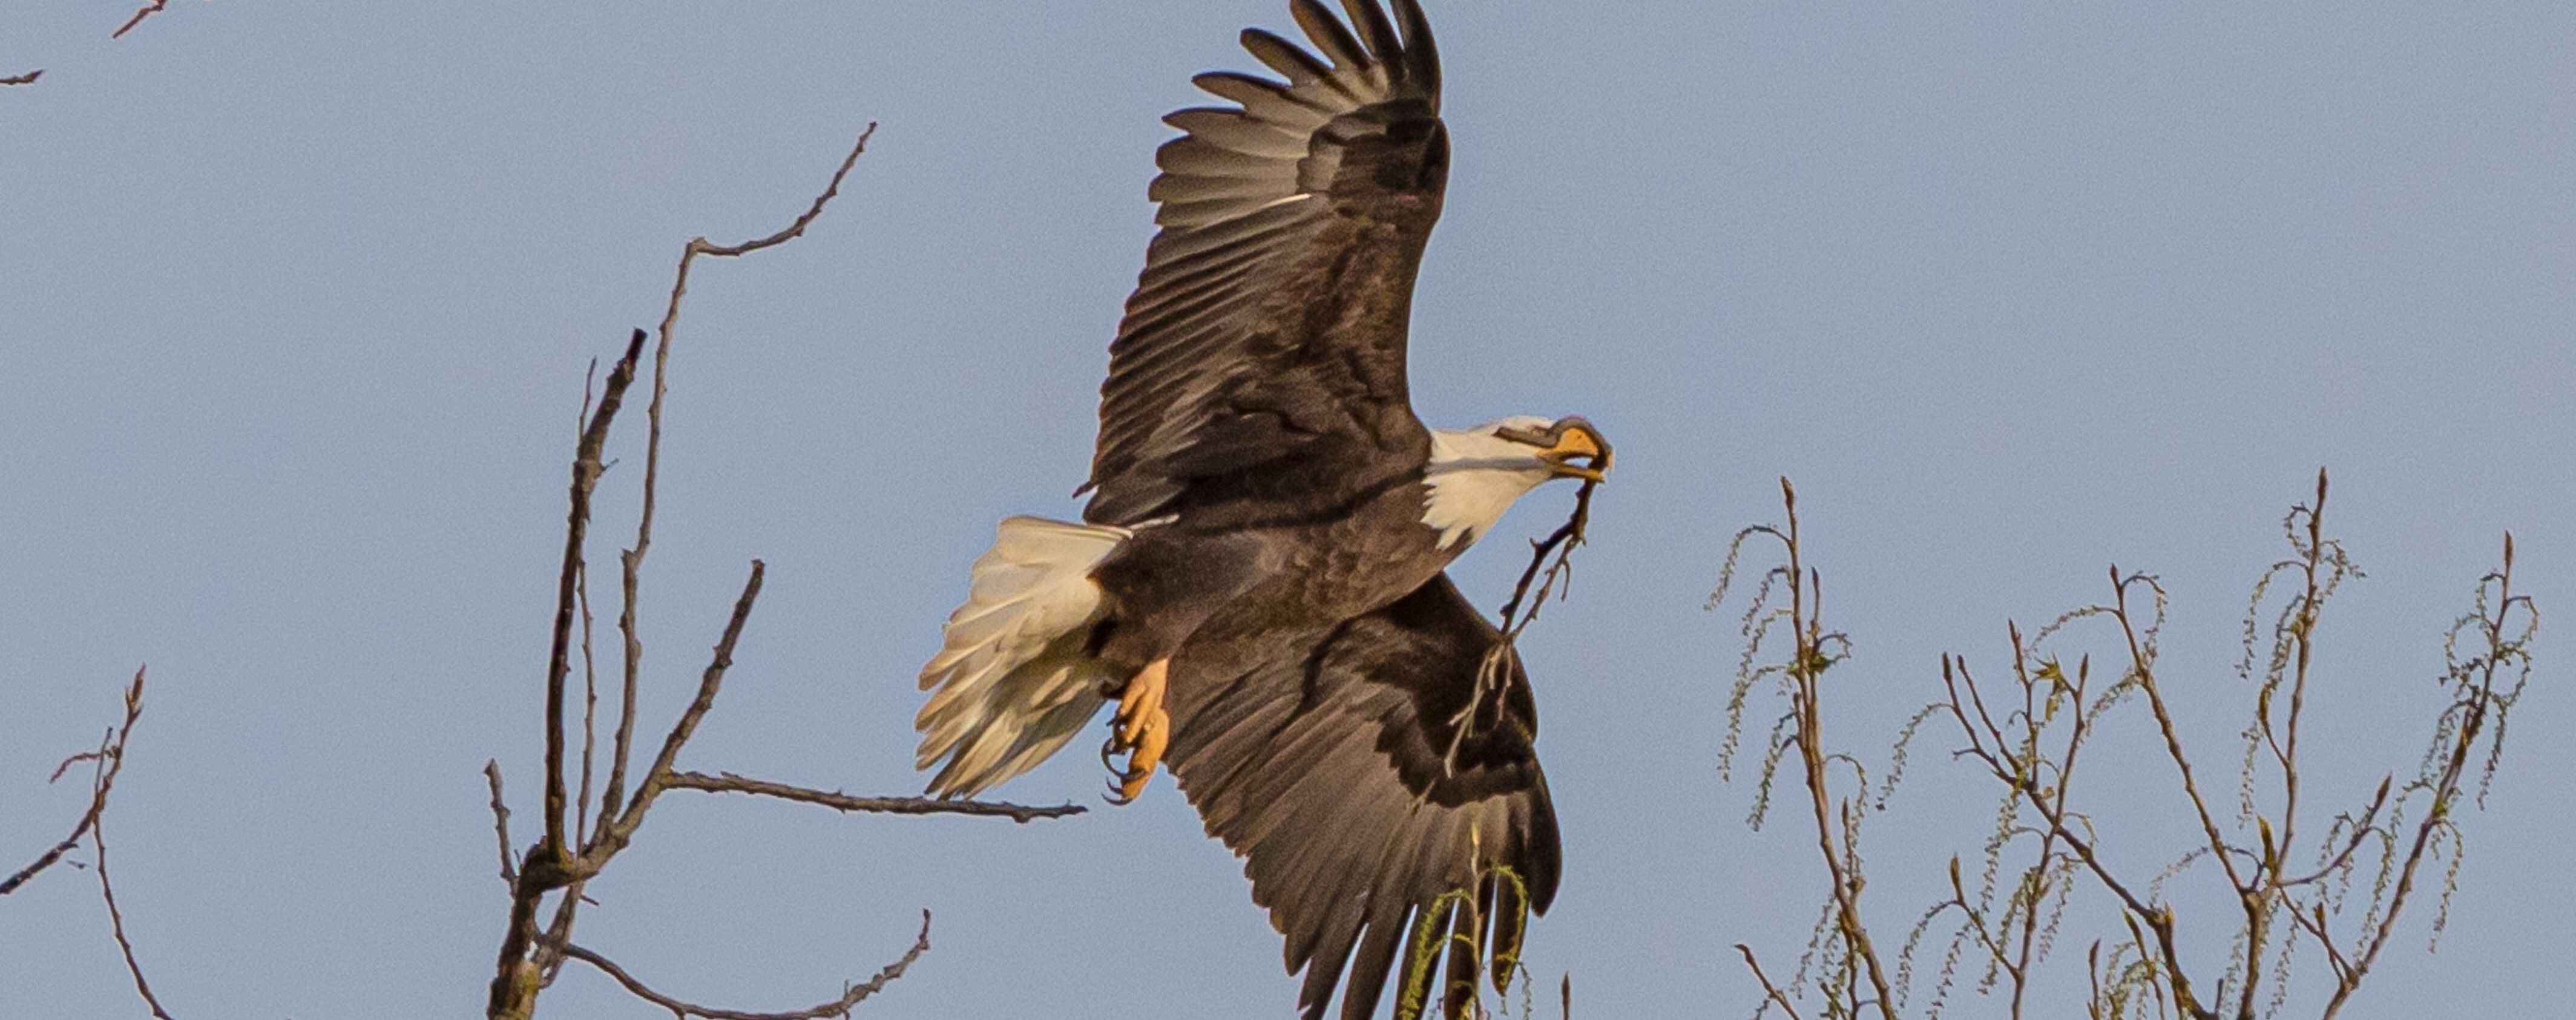 NOW IS AN EXCELLENT TIME TO WATCH FOR BALD EAGLES